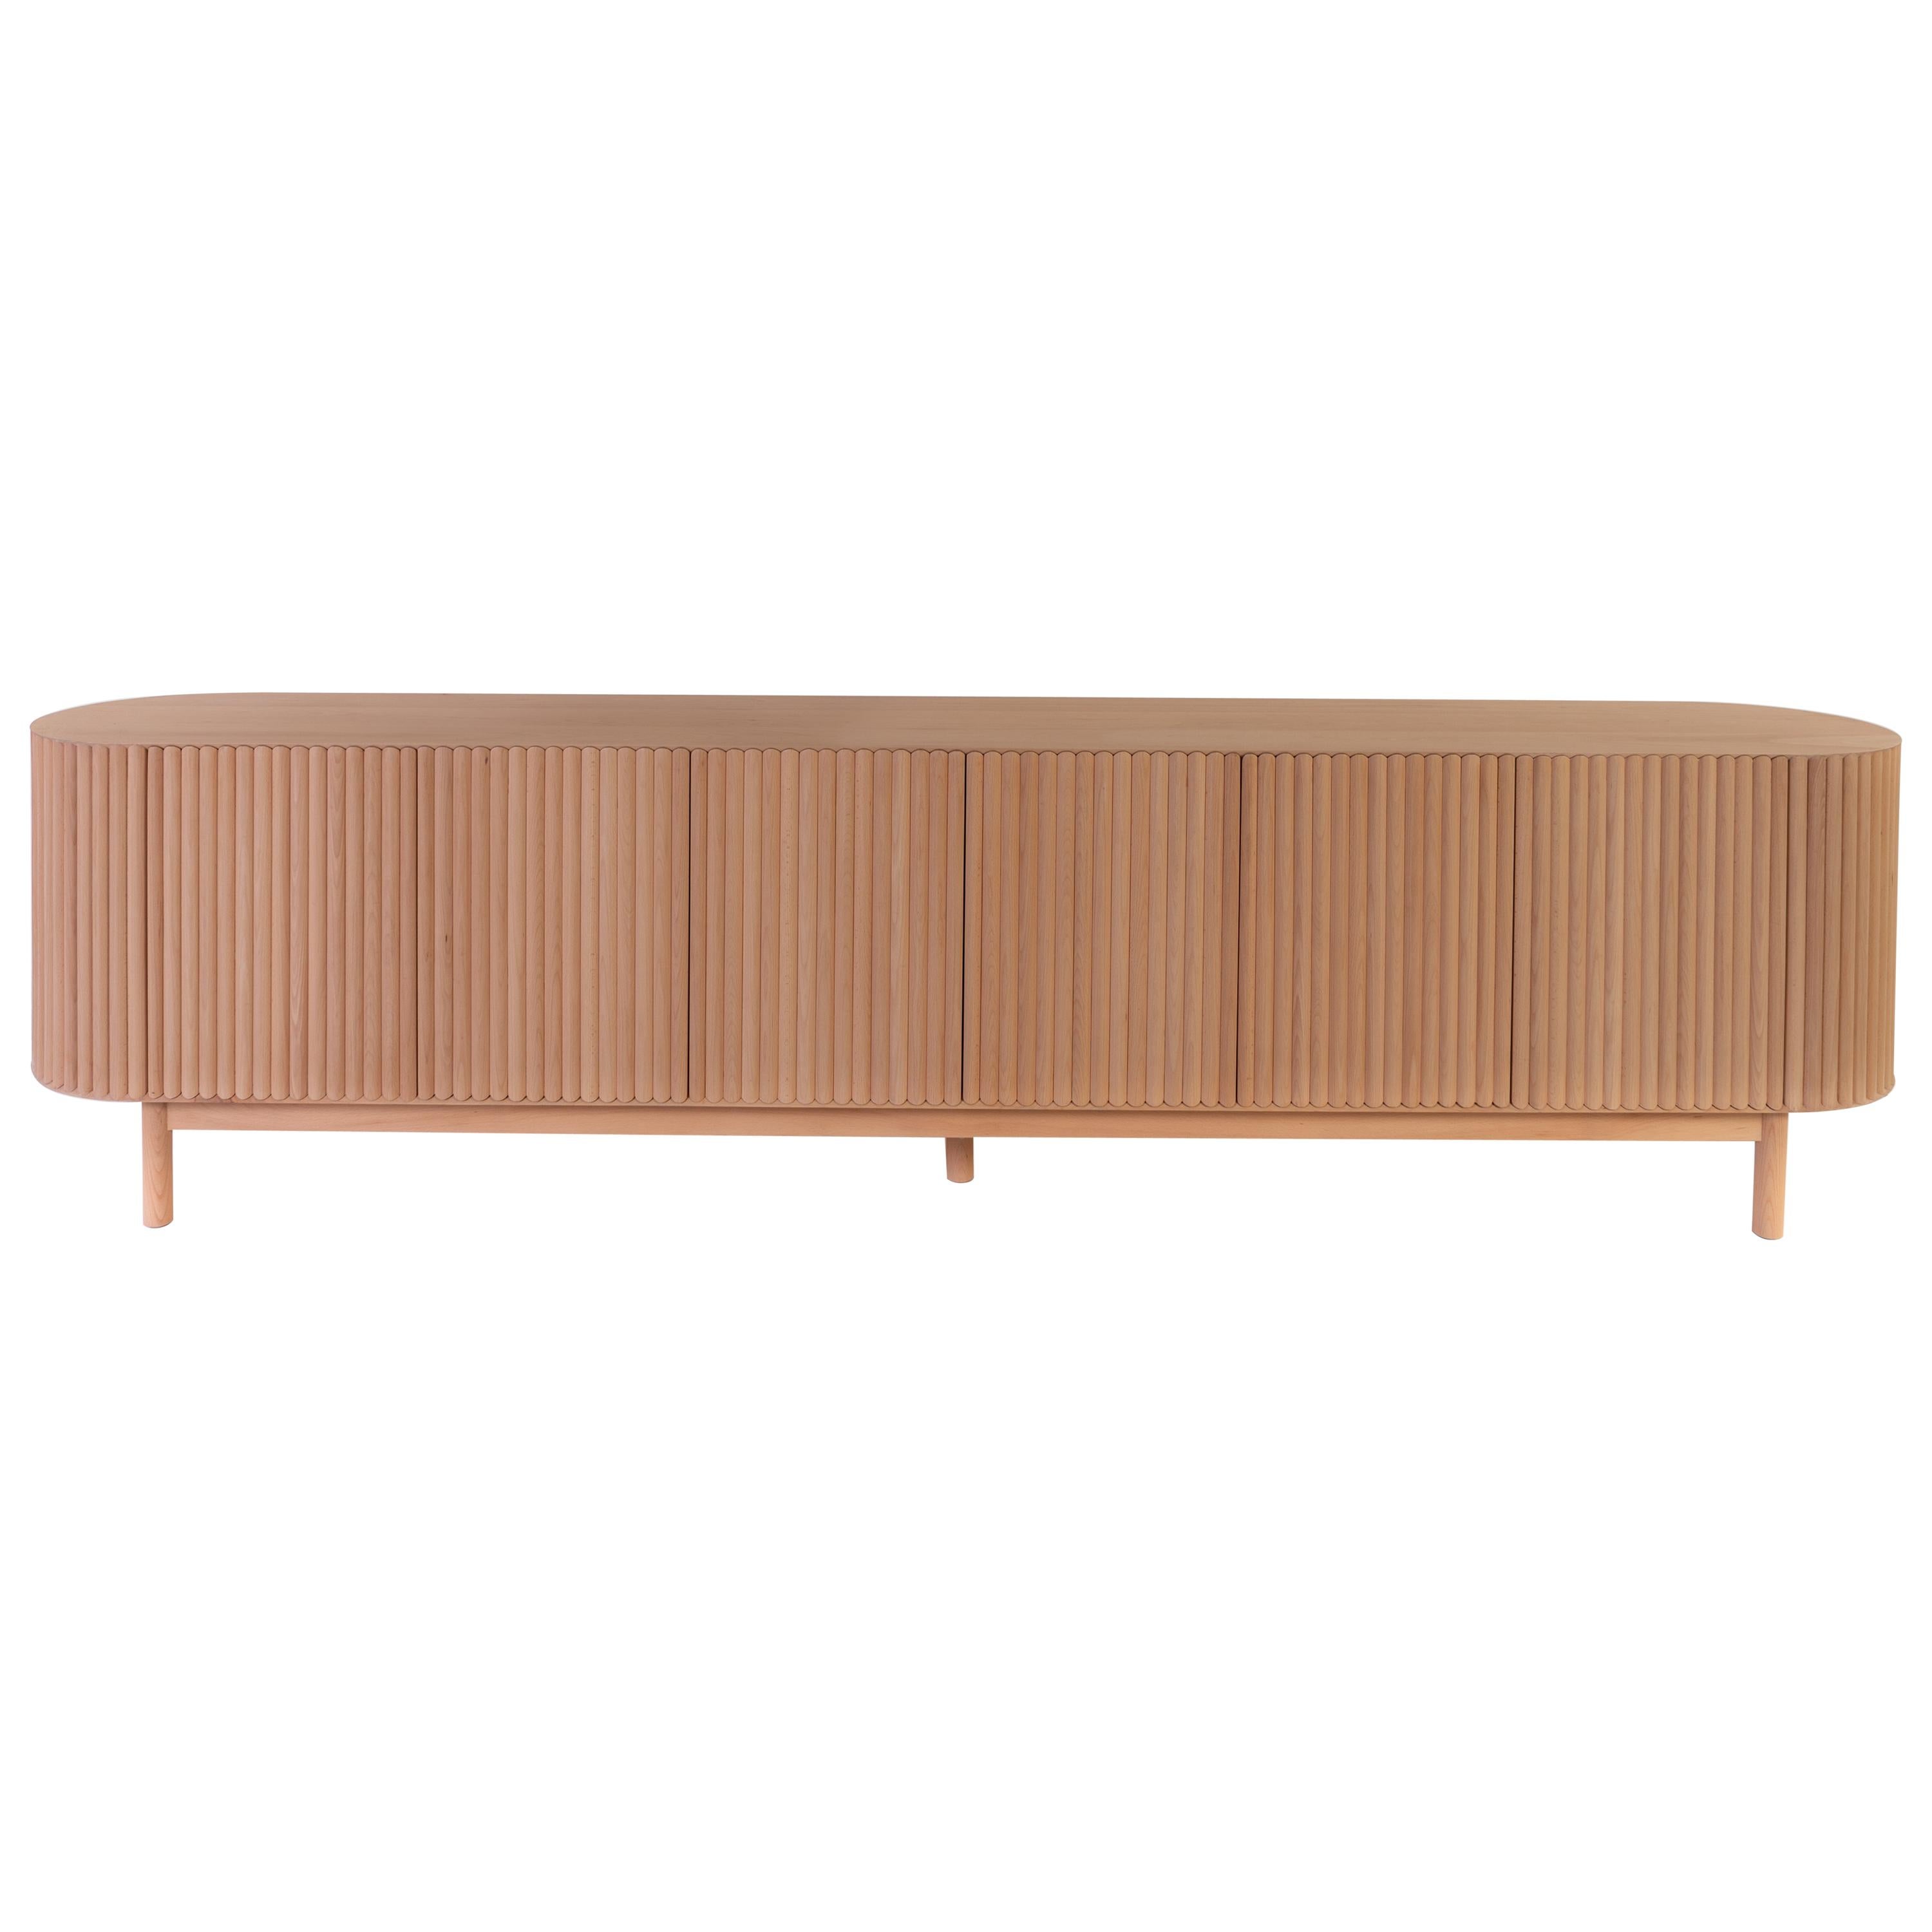 RIMA Credenza, 3M Solid Beech Wood For Sale